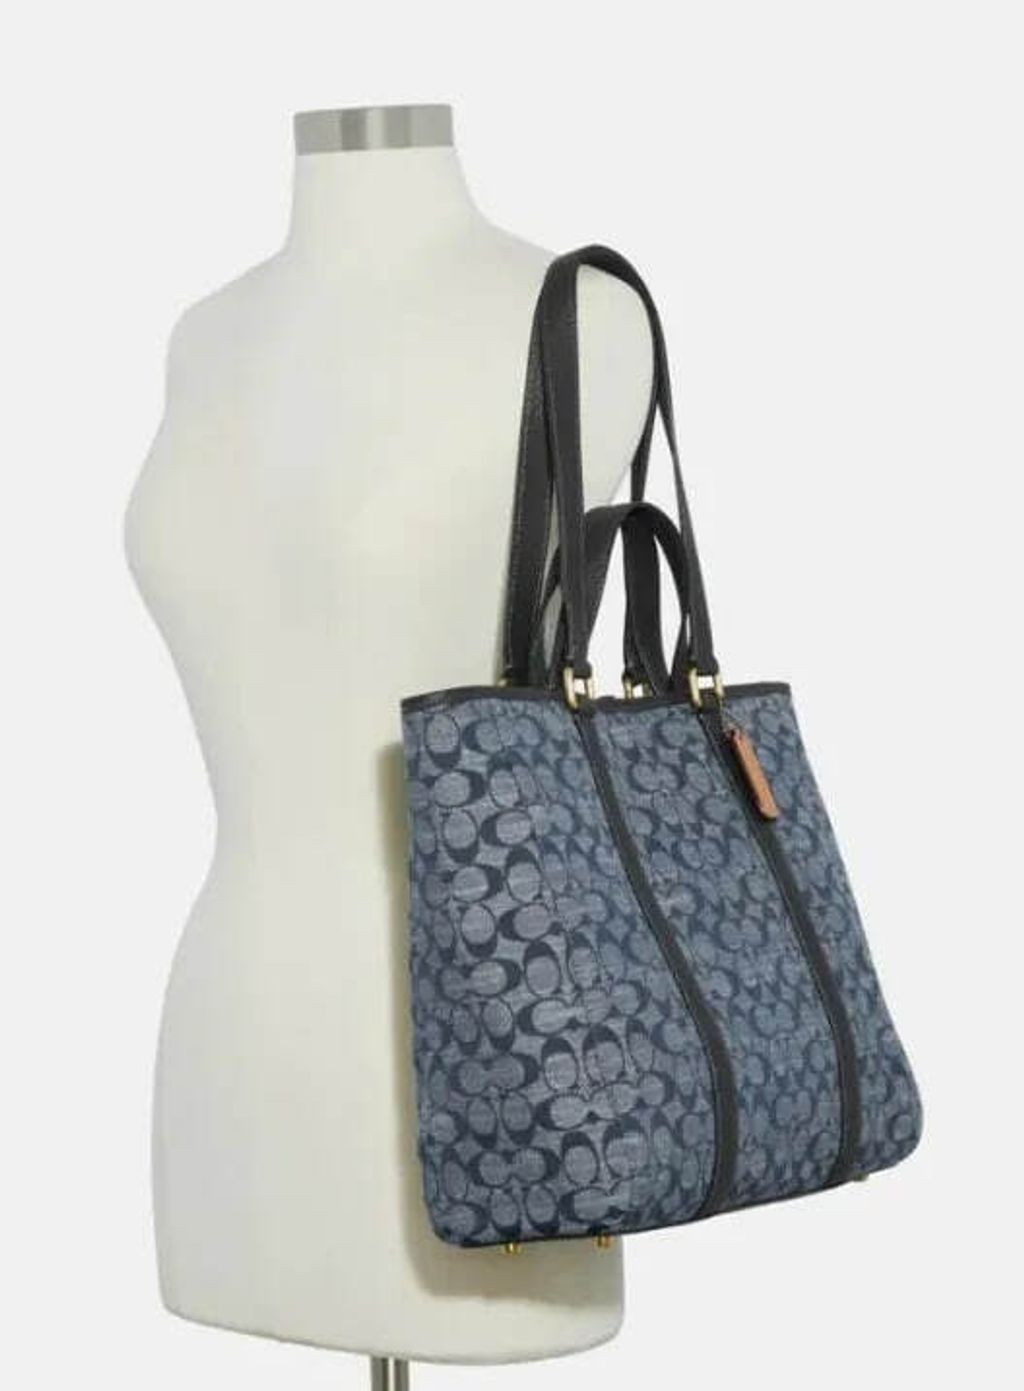 handbagbranded.com getlush outlet coach outlet personalshopper usa malaysia  COACH Hudson Double Handle Tote 2